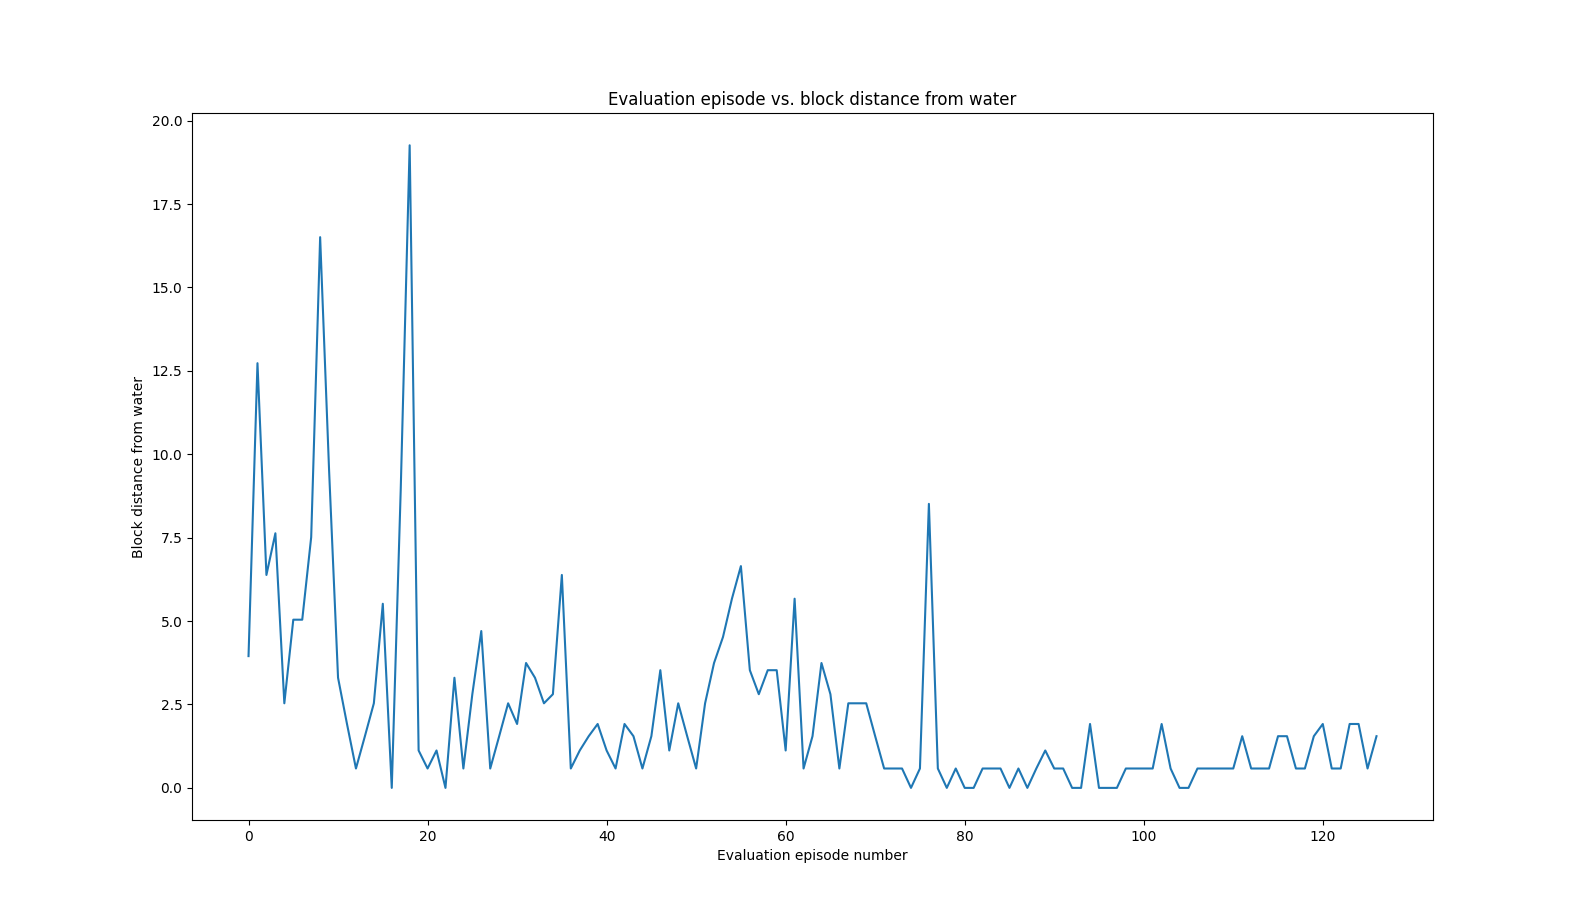 !Graph plotting episode evaluation number vs block distance from water, a decrease over time